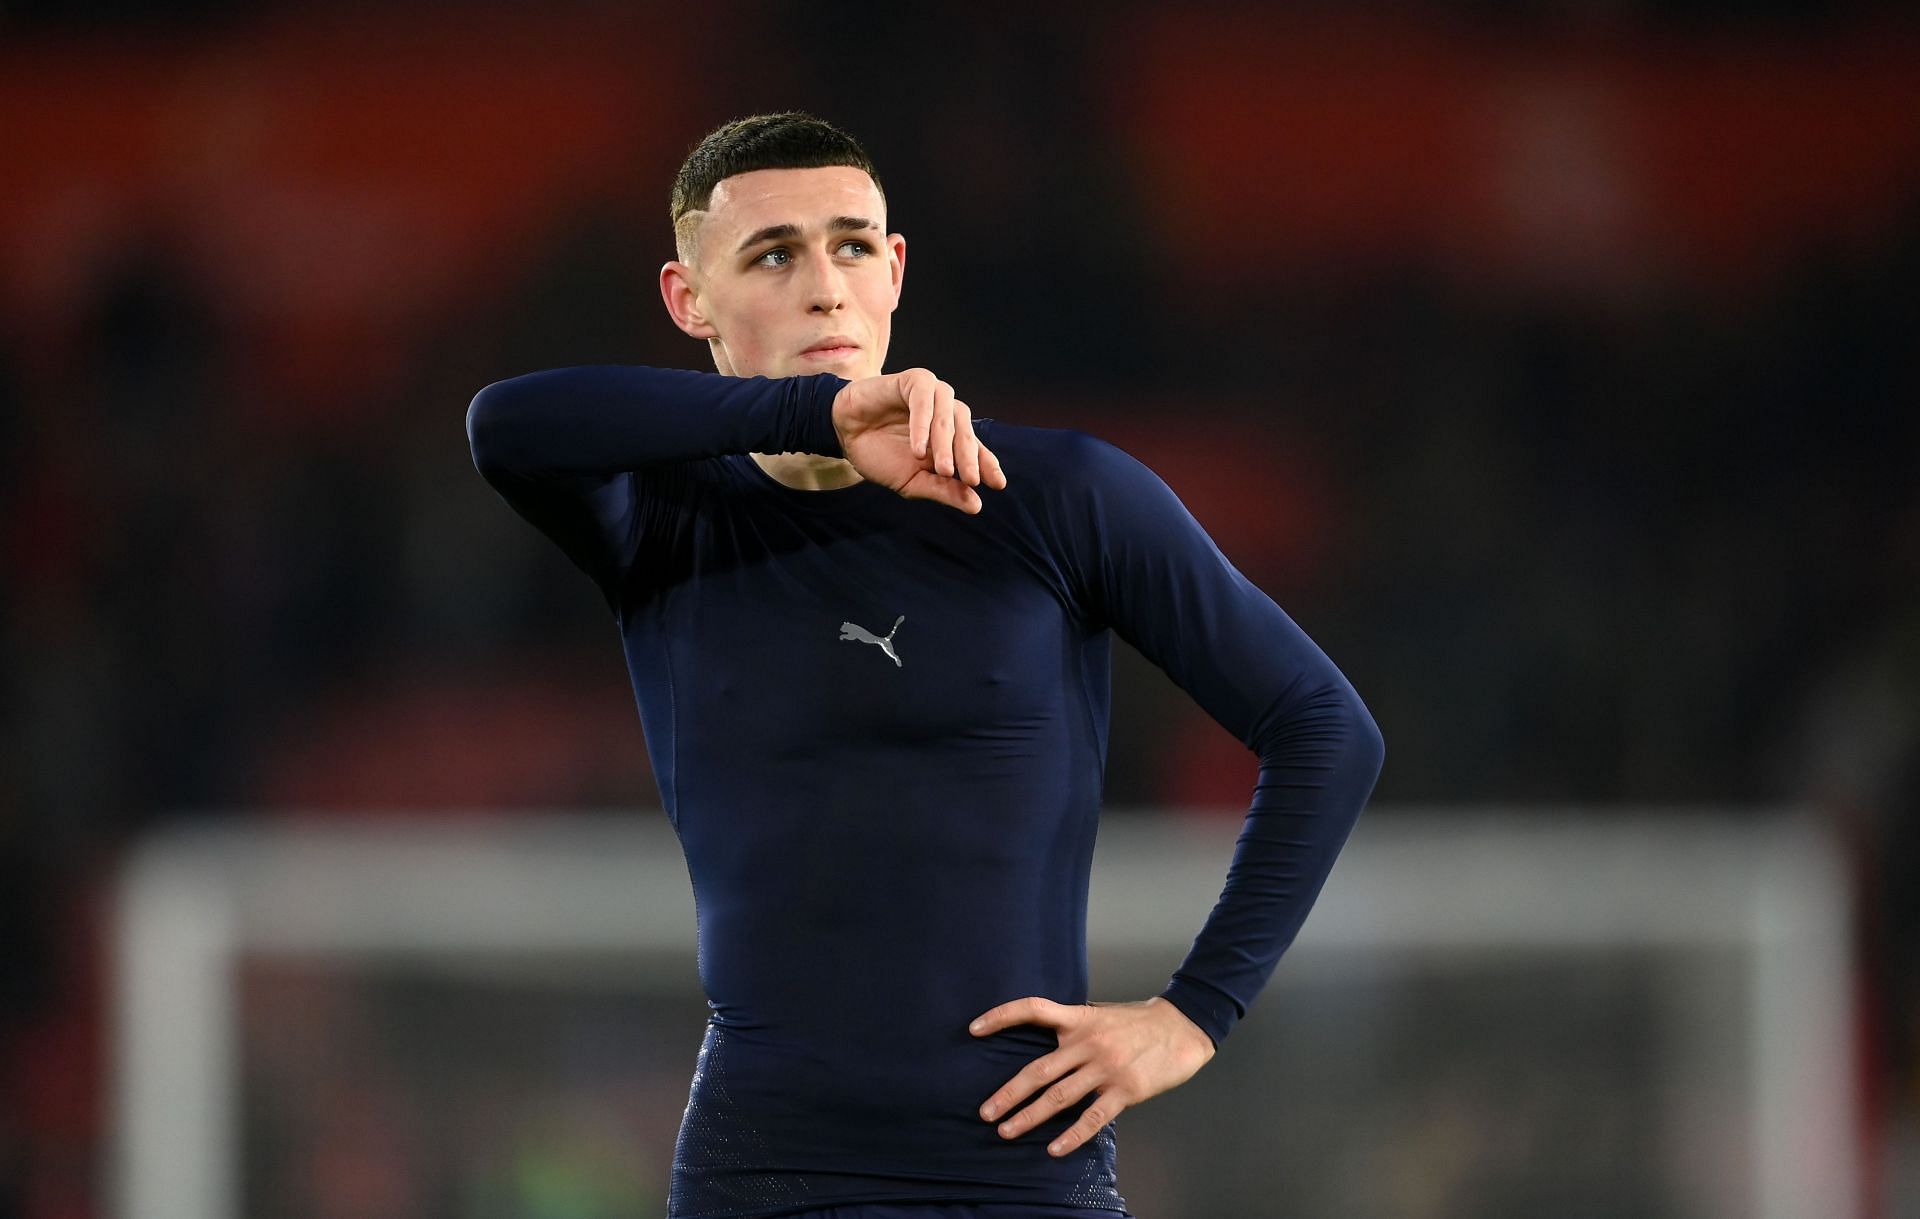 Phil Foden is one of the most valuable Manchester City players.